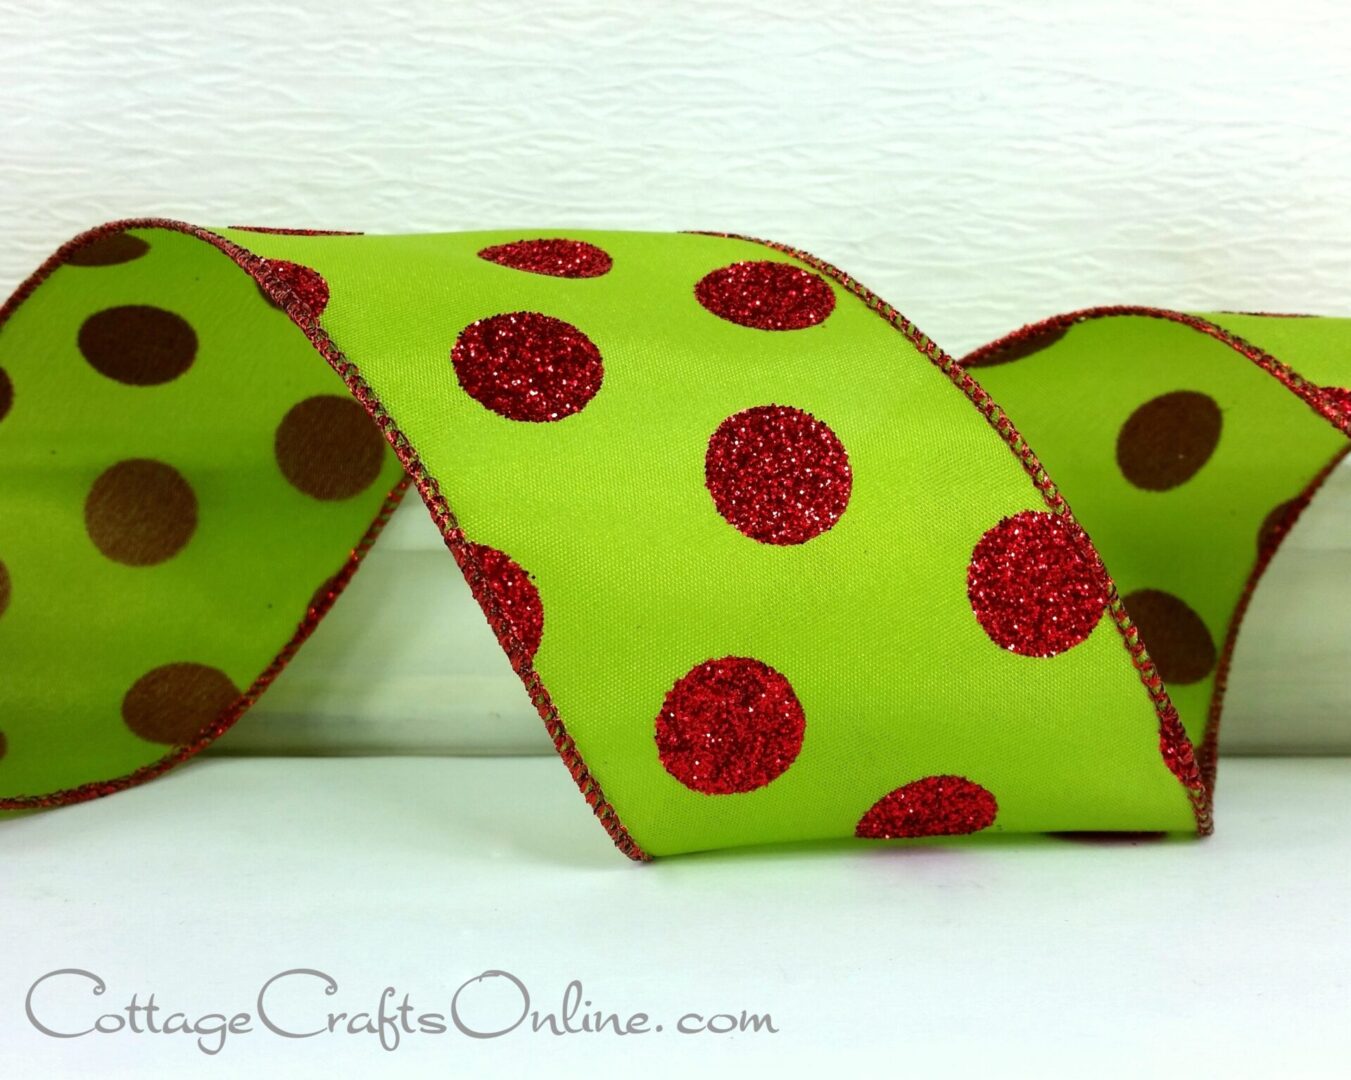 Red glitter dots on lime green satin 2.5" wide wired ribbon from the Etsy shop of Cottage Crafts Online.